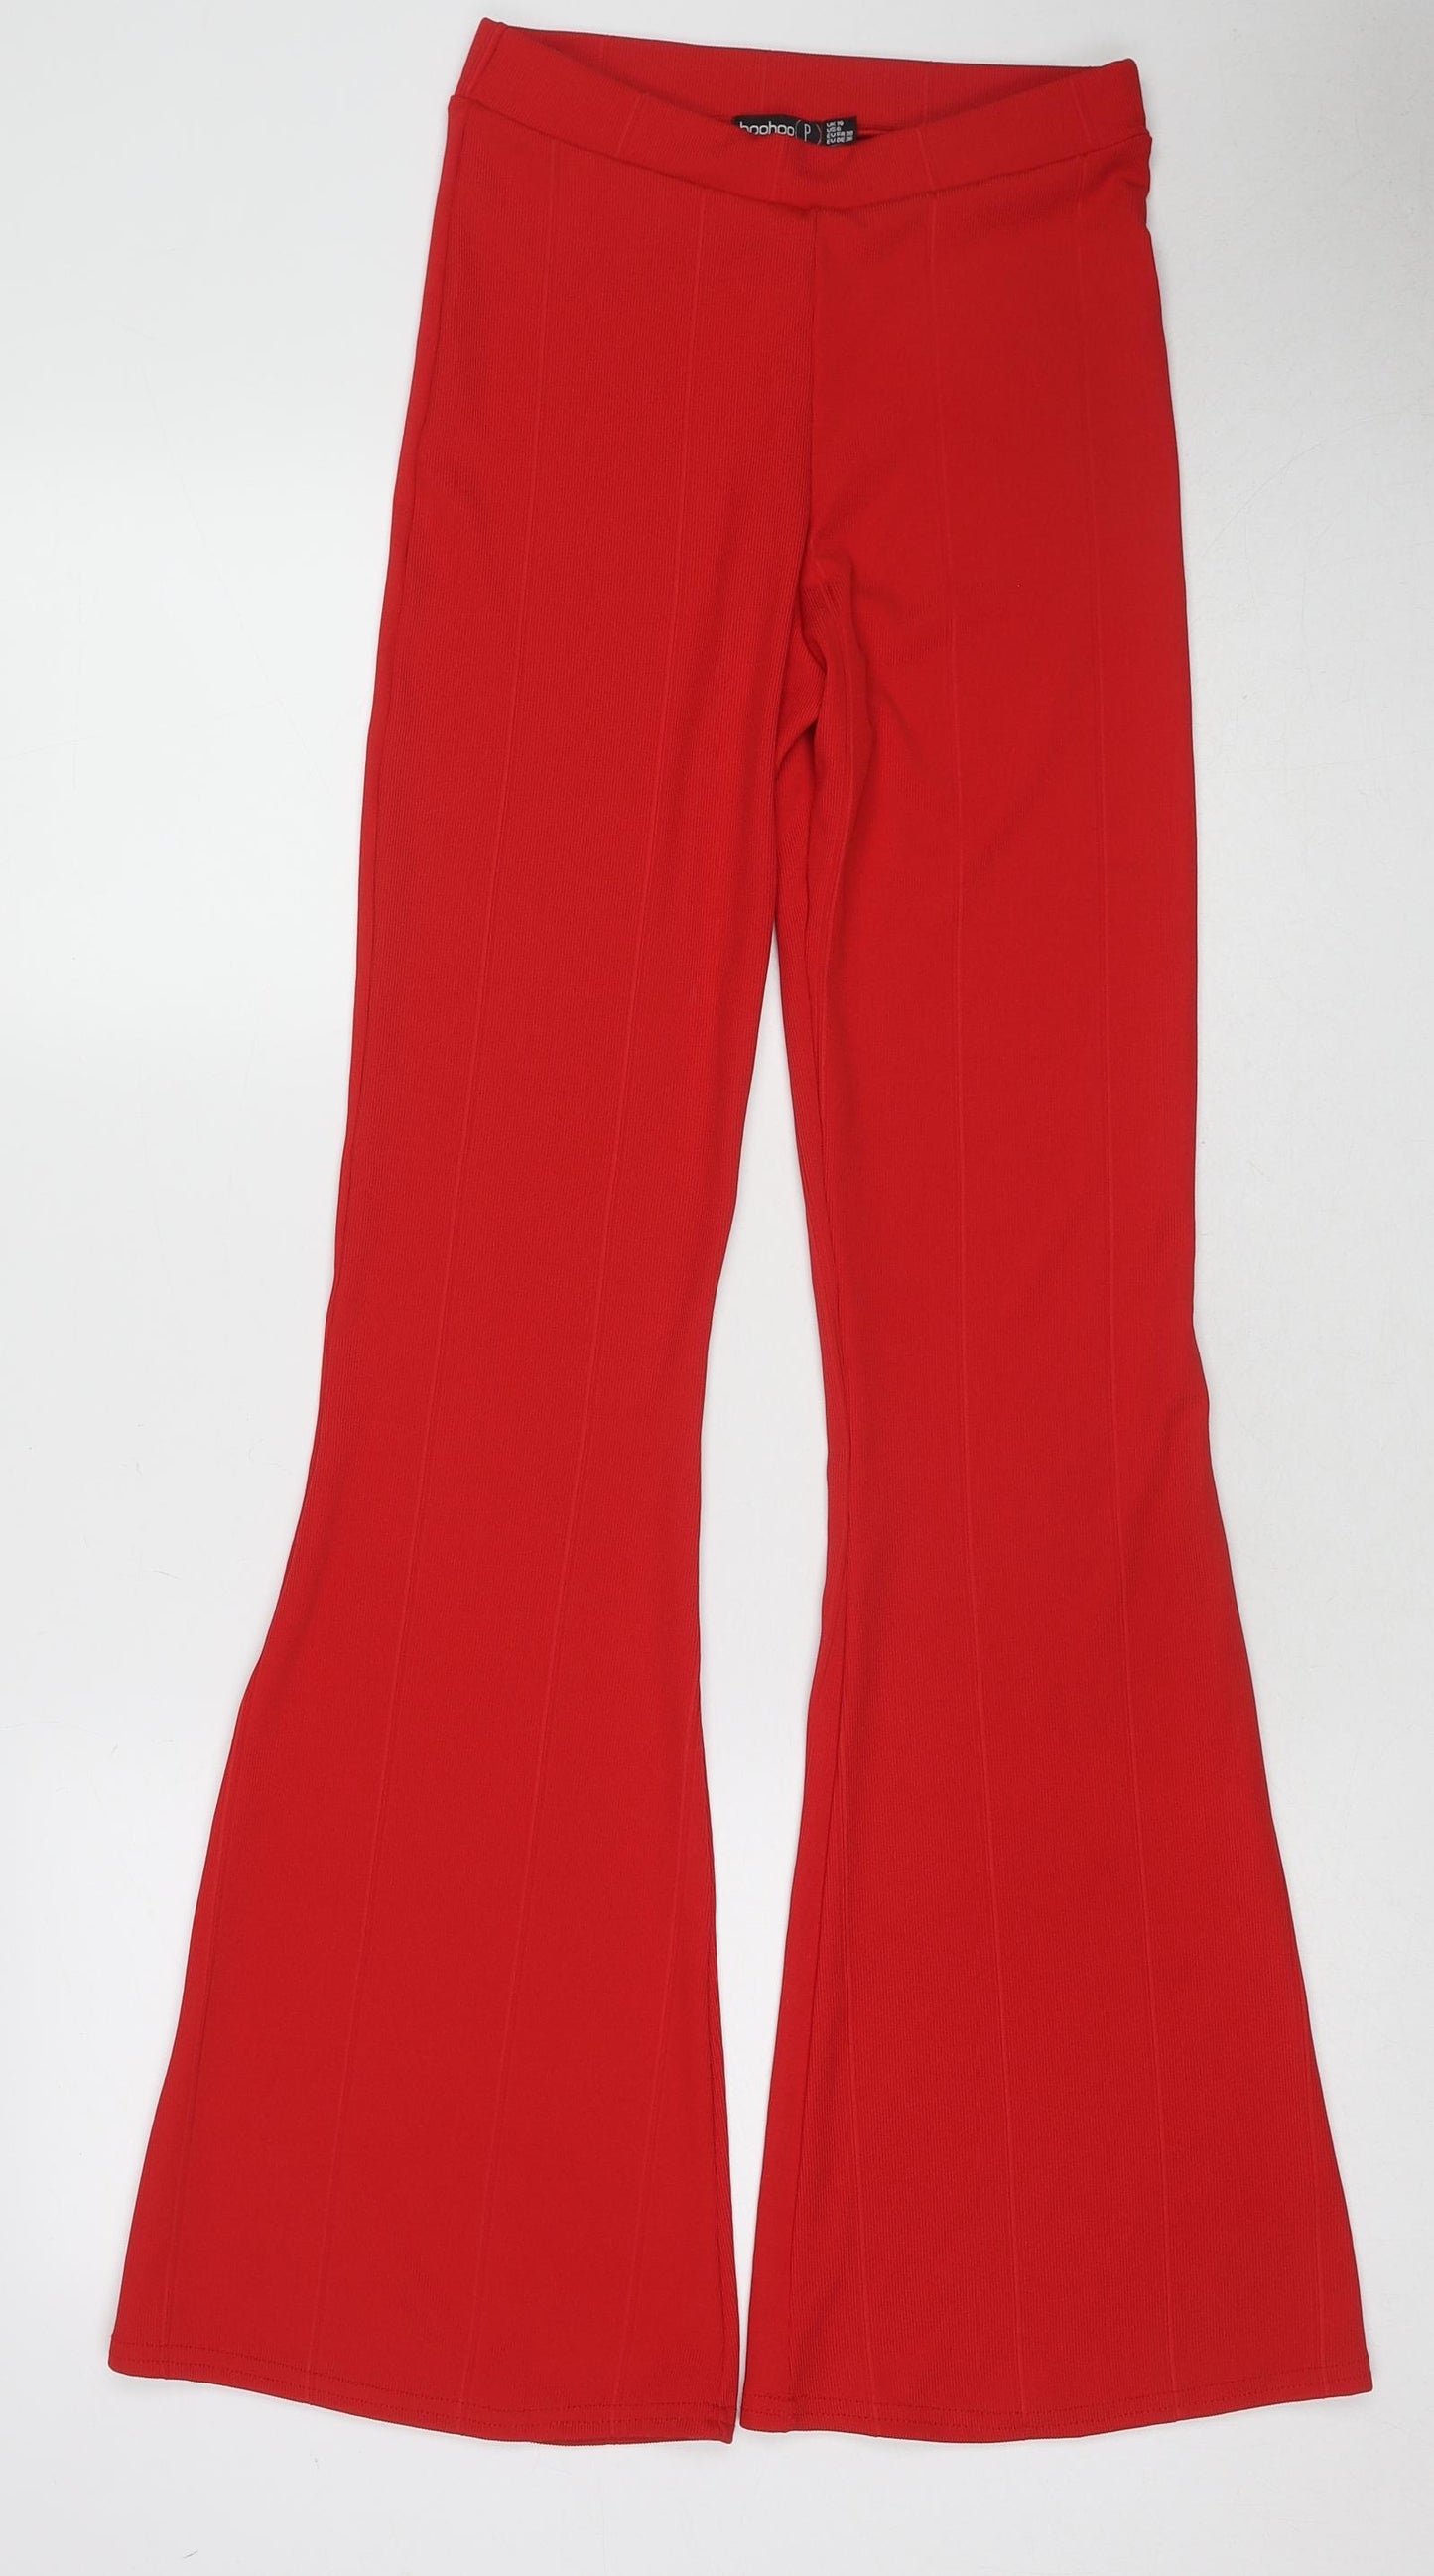 Boohoo Womens Red Polyester Trousers Size 10 L31 in Regular - Ribbed Fabric